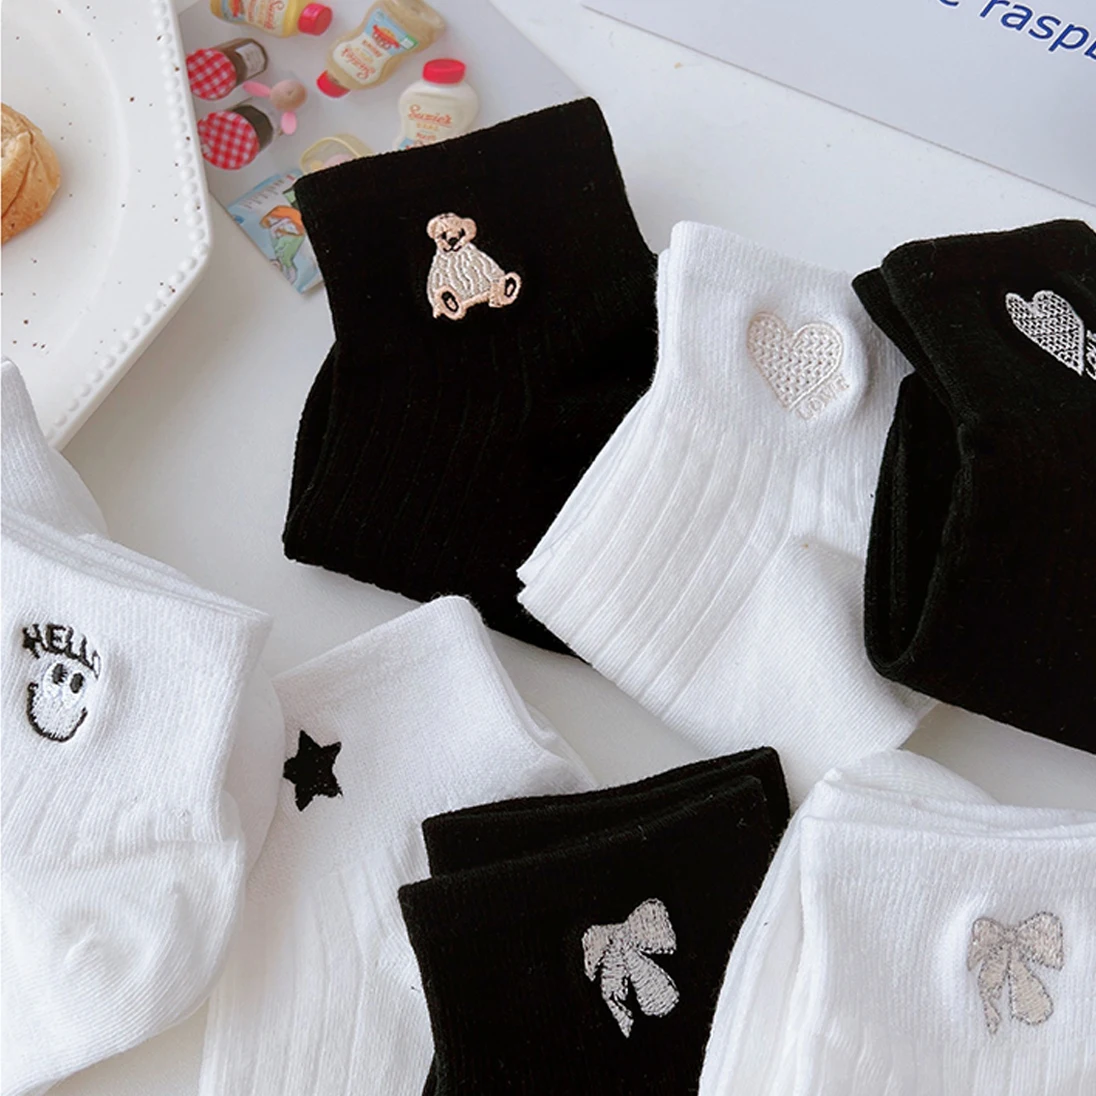 

CHAOZHU 5 Pairs Black White Lolita Students Girls Fashion Cute Moon Star Heart Bow Knot Embroidery Ribbed Cotton Socks Set